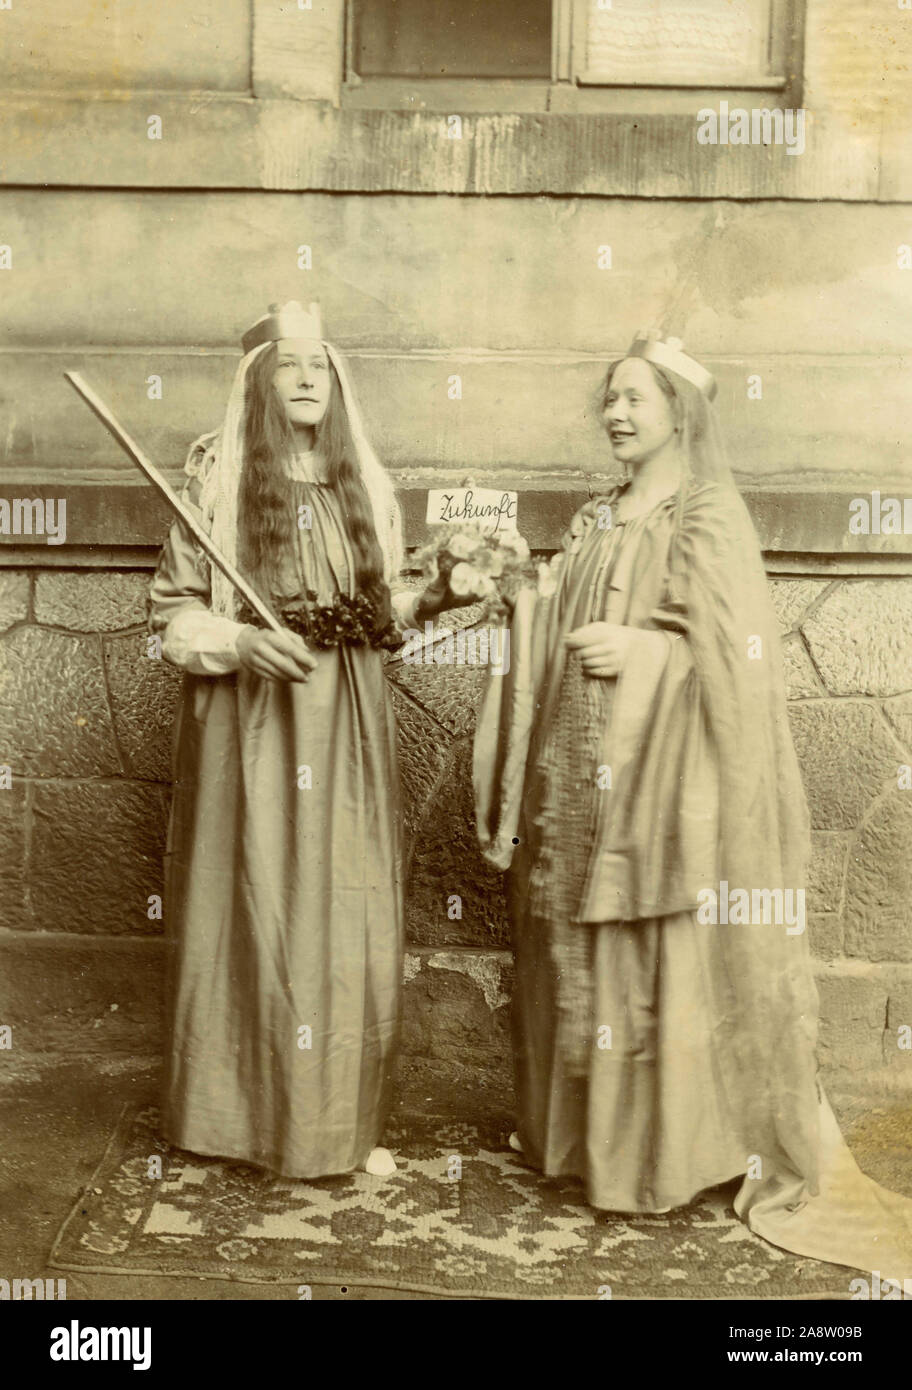 Two women dressed up as fortune tellers, Germany 1913 Stock Photo